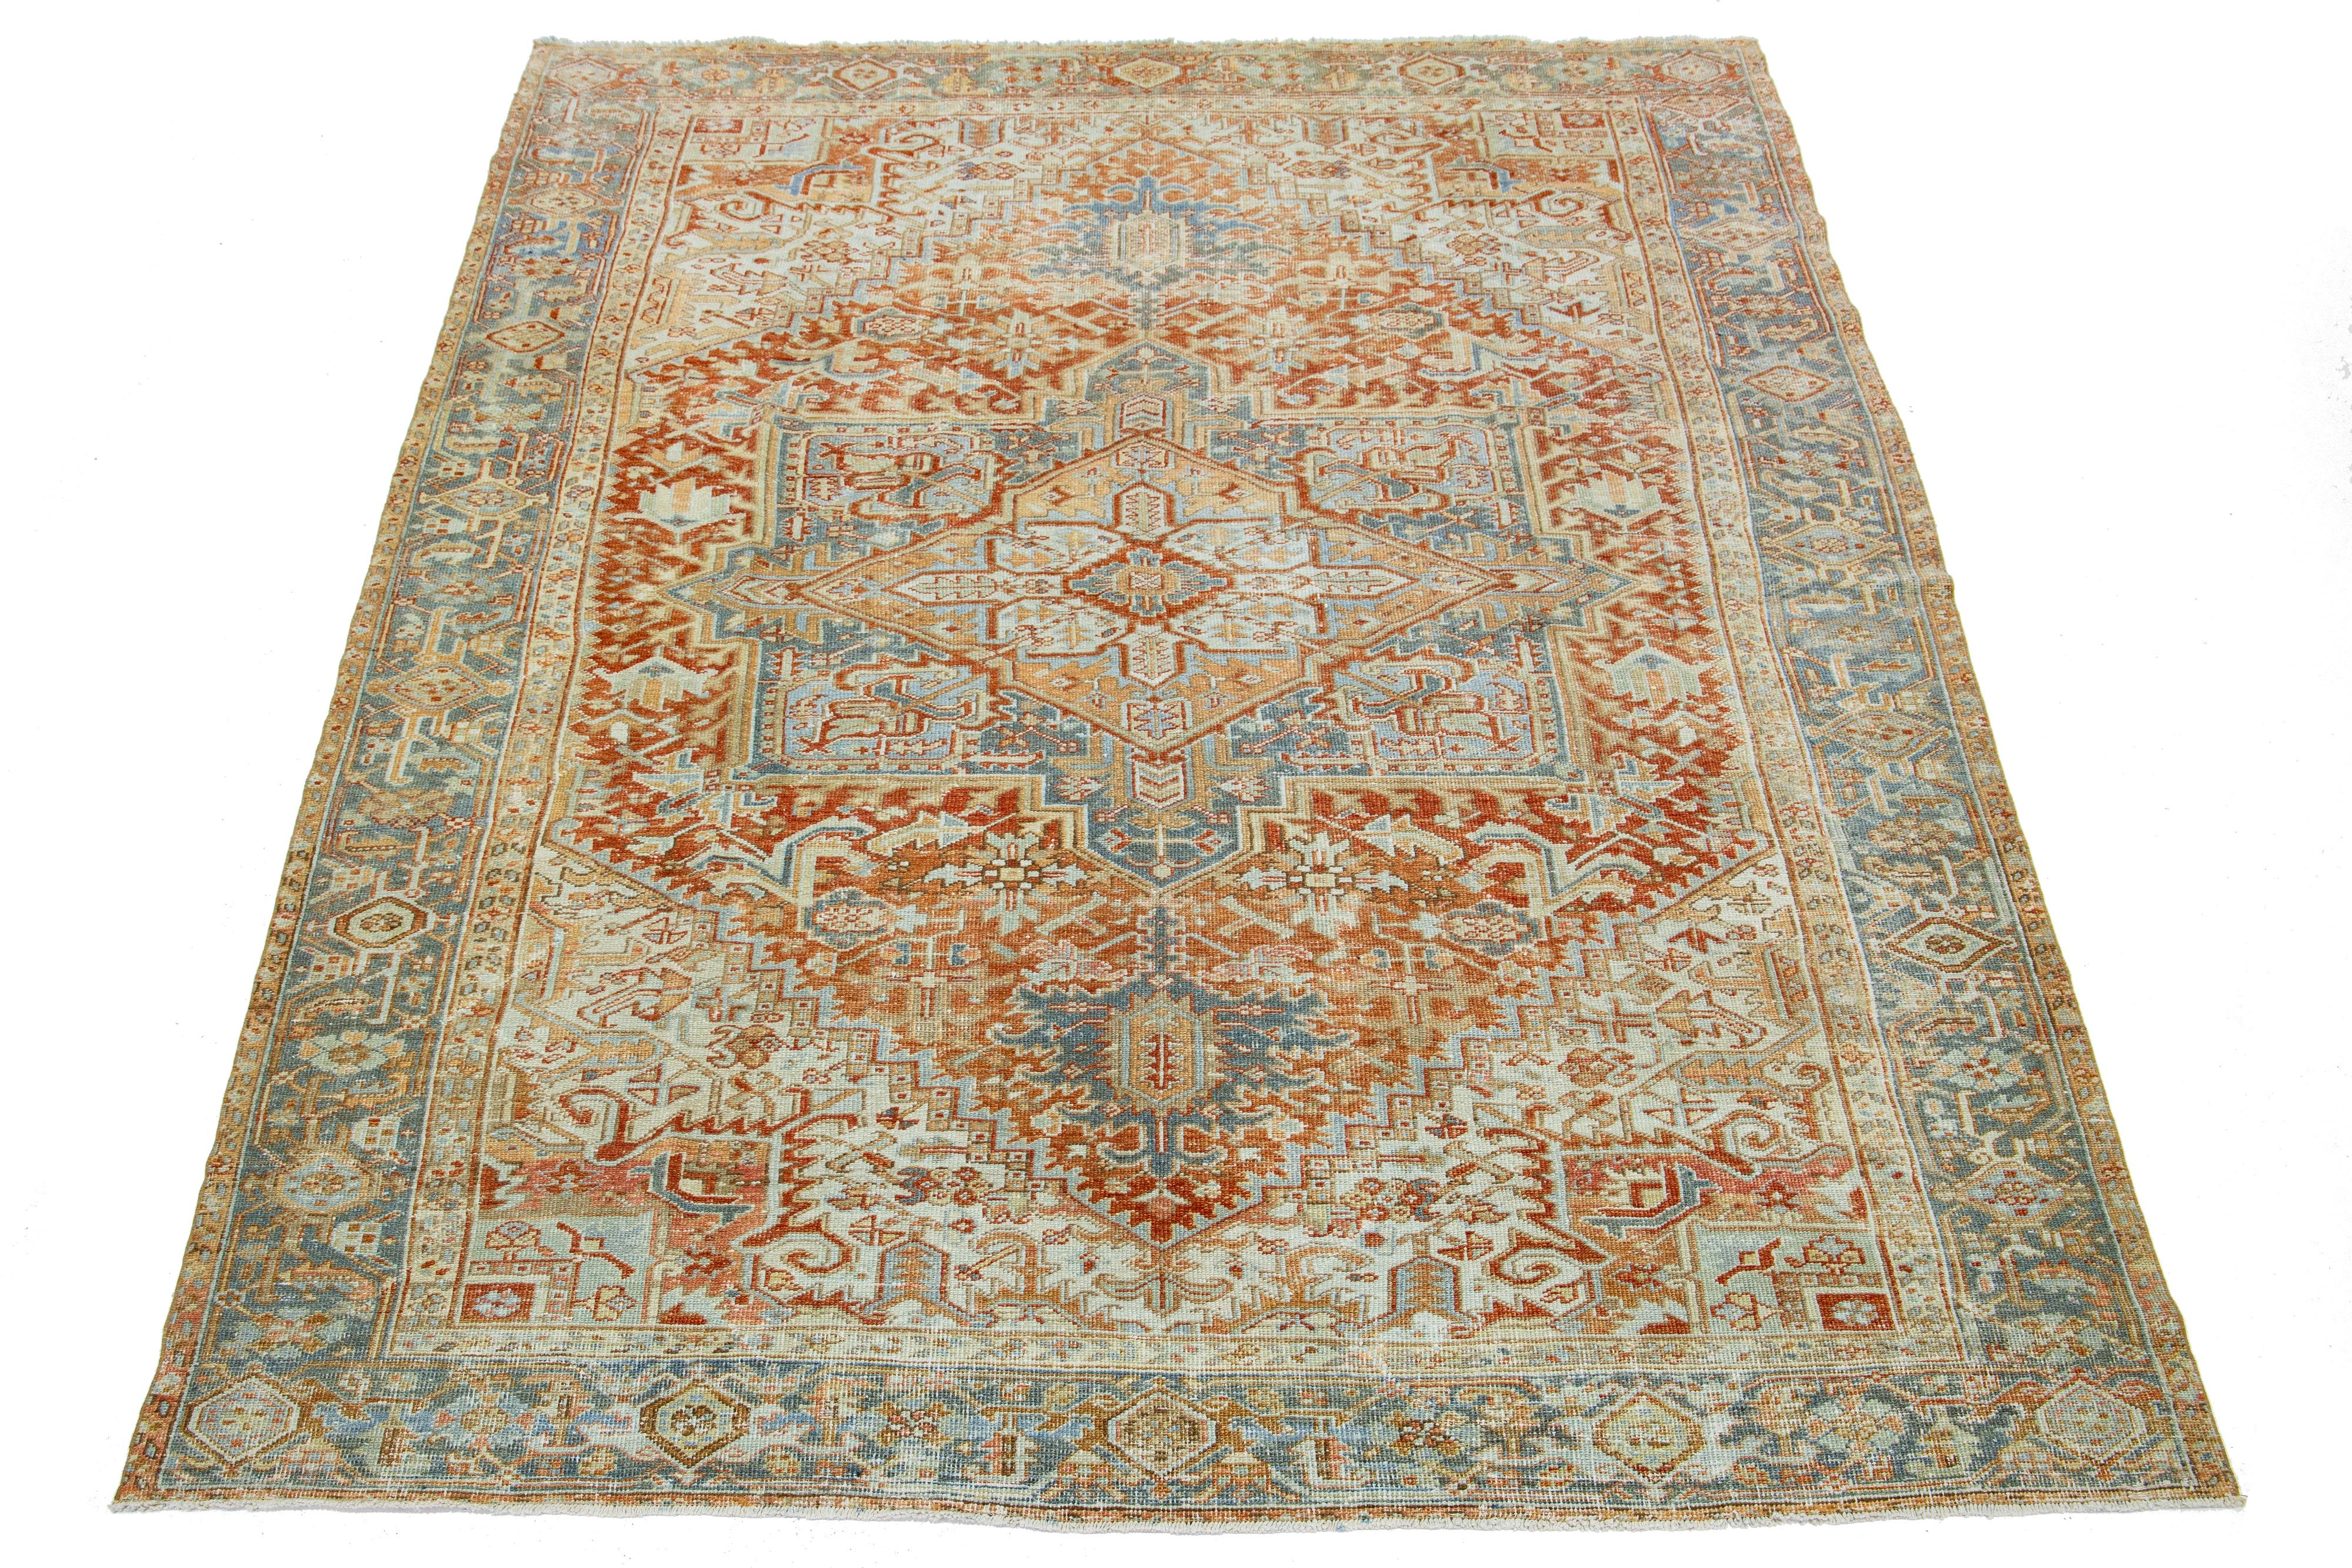 This antique Persian Heriz rug is crafted with hand-knotted wool. The rust-colored field features a captivating medallion pattern embellished with shades of blue, beige, and peach.

This rug measures 8' x 11'1